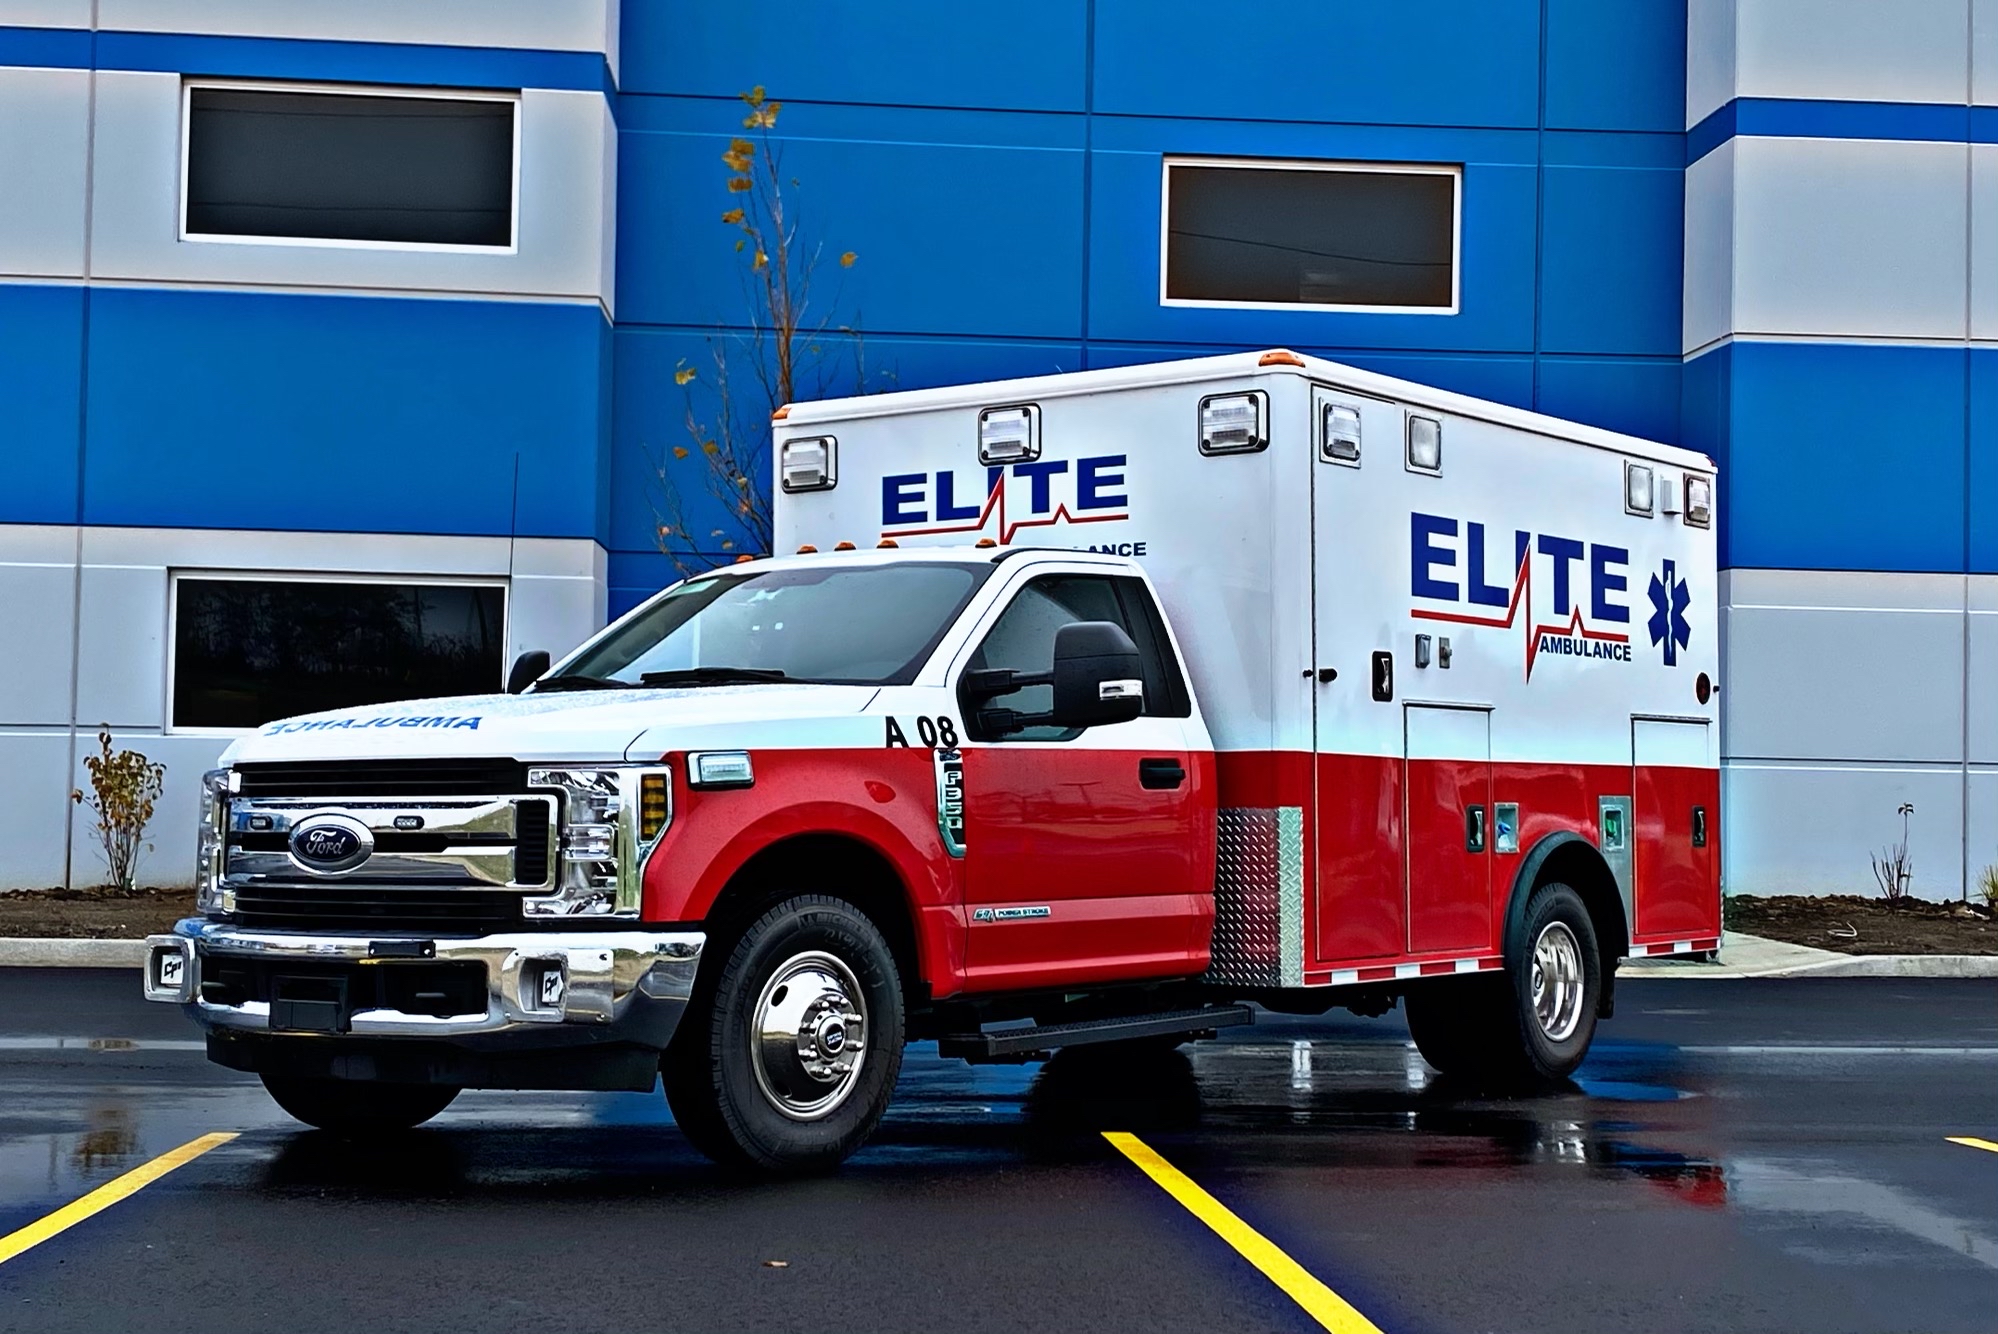 How much does an ambulance ride cost?